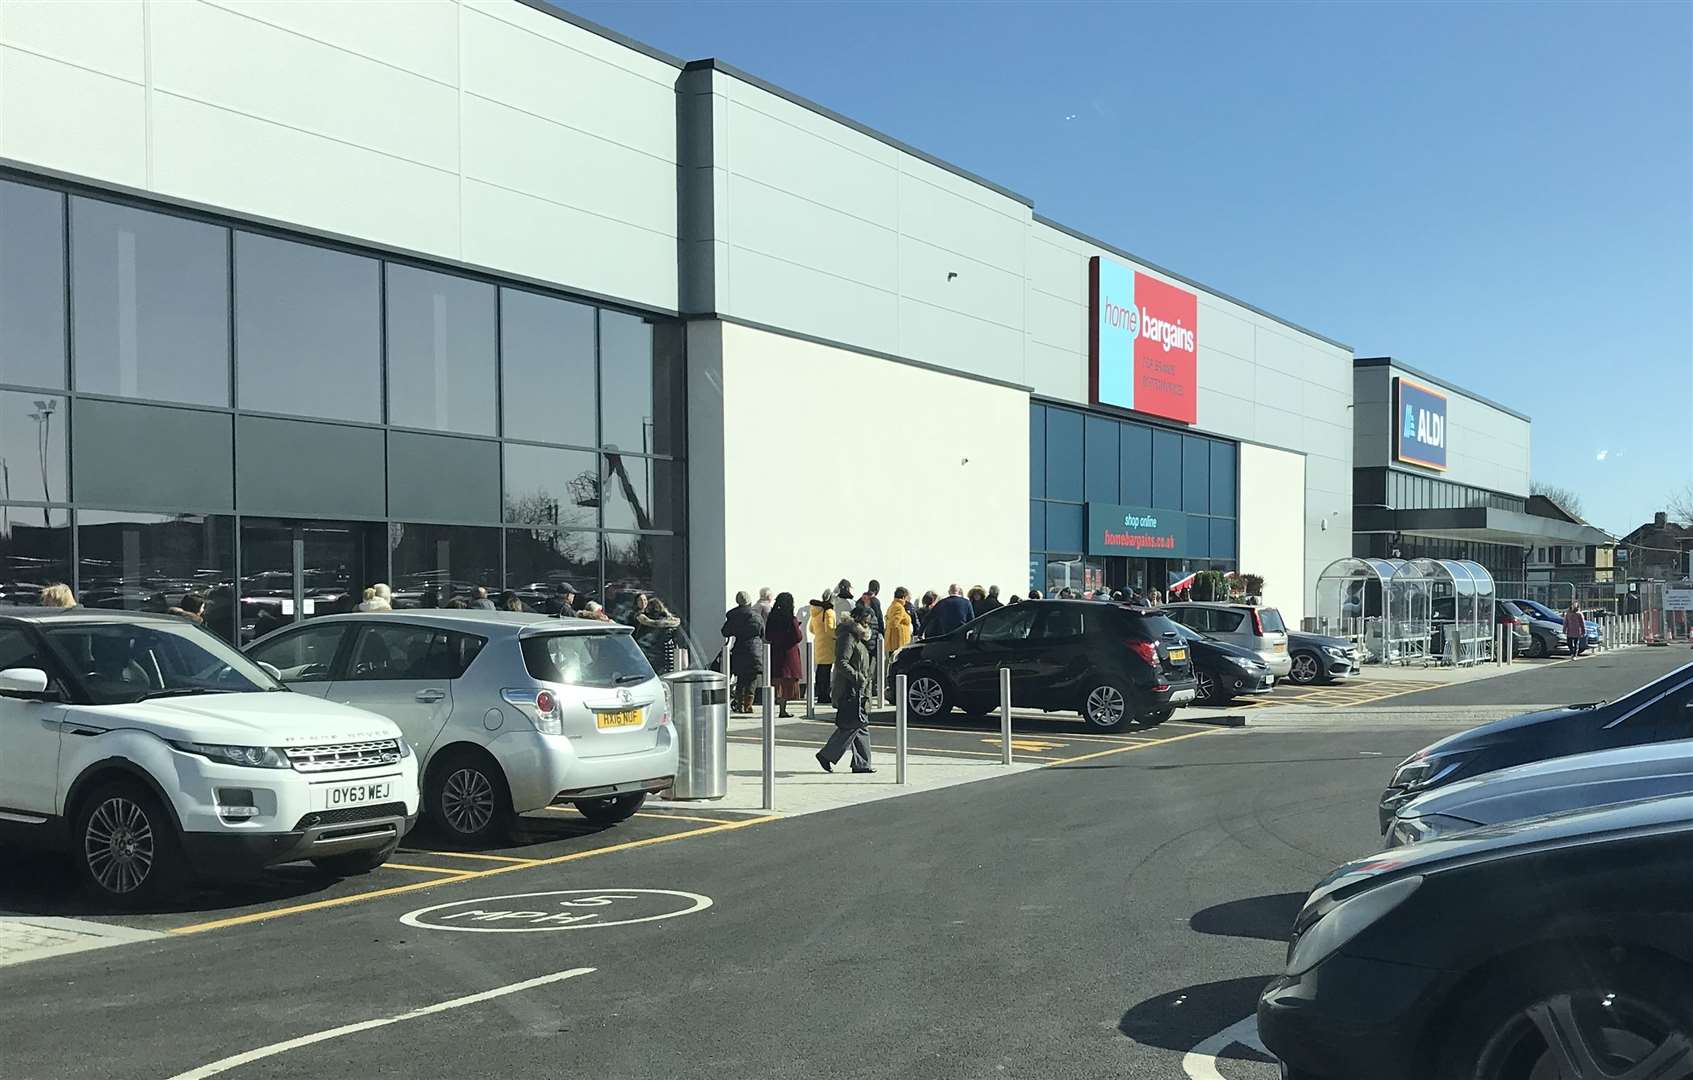 Huge queues at the launch of a new Home Bargains store in Chatham